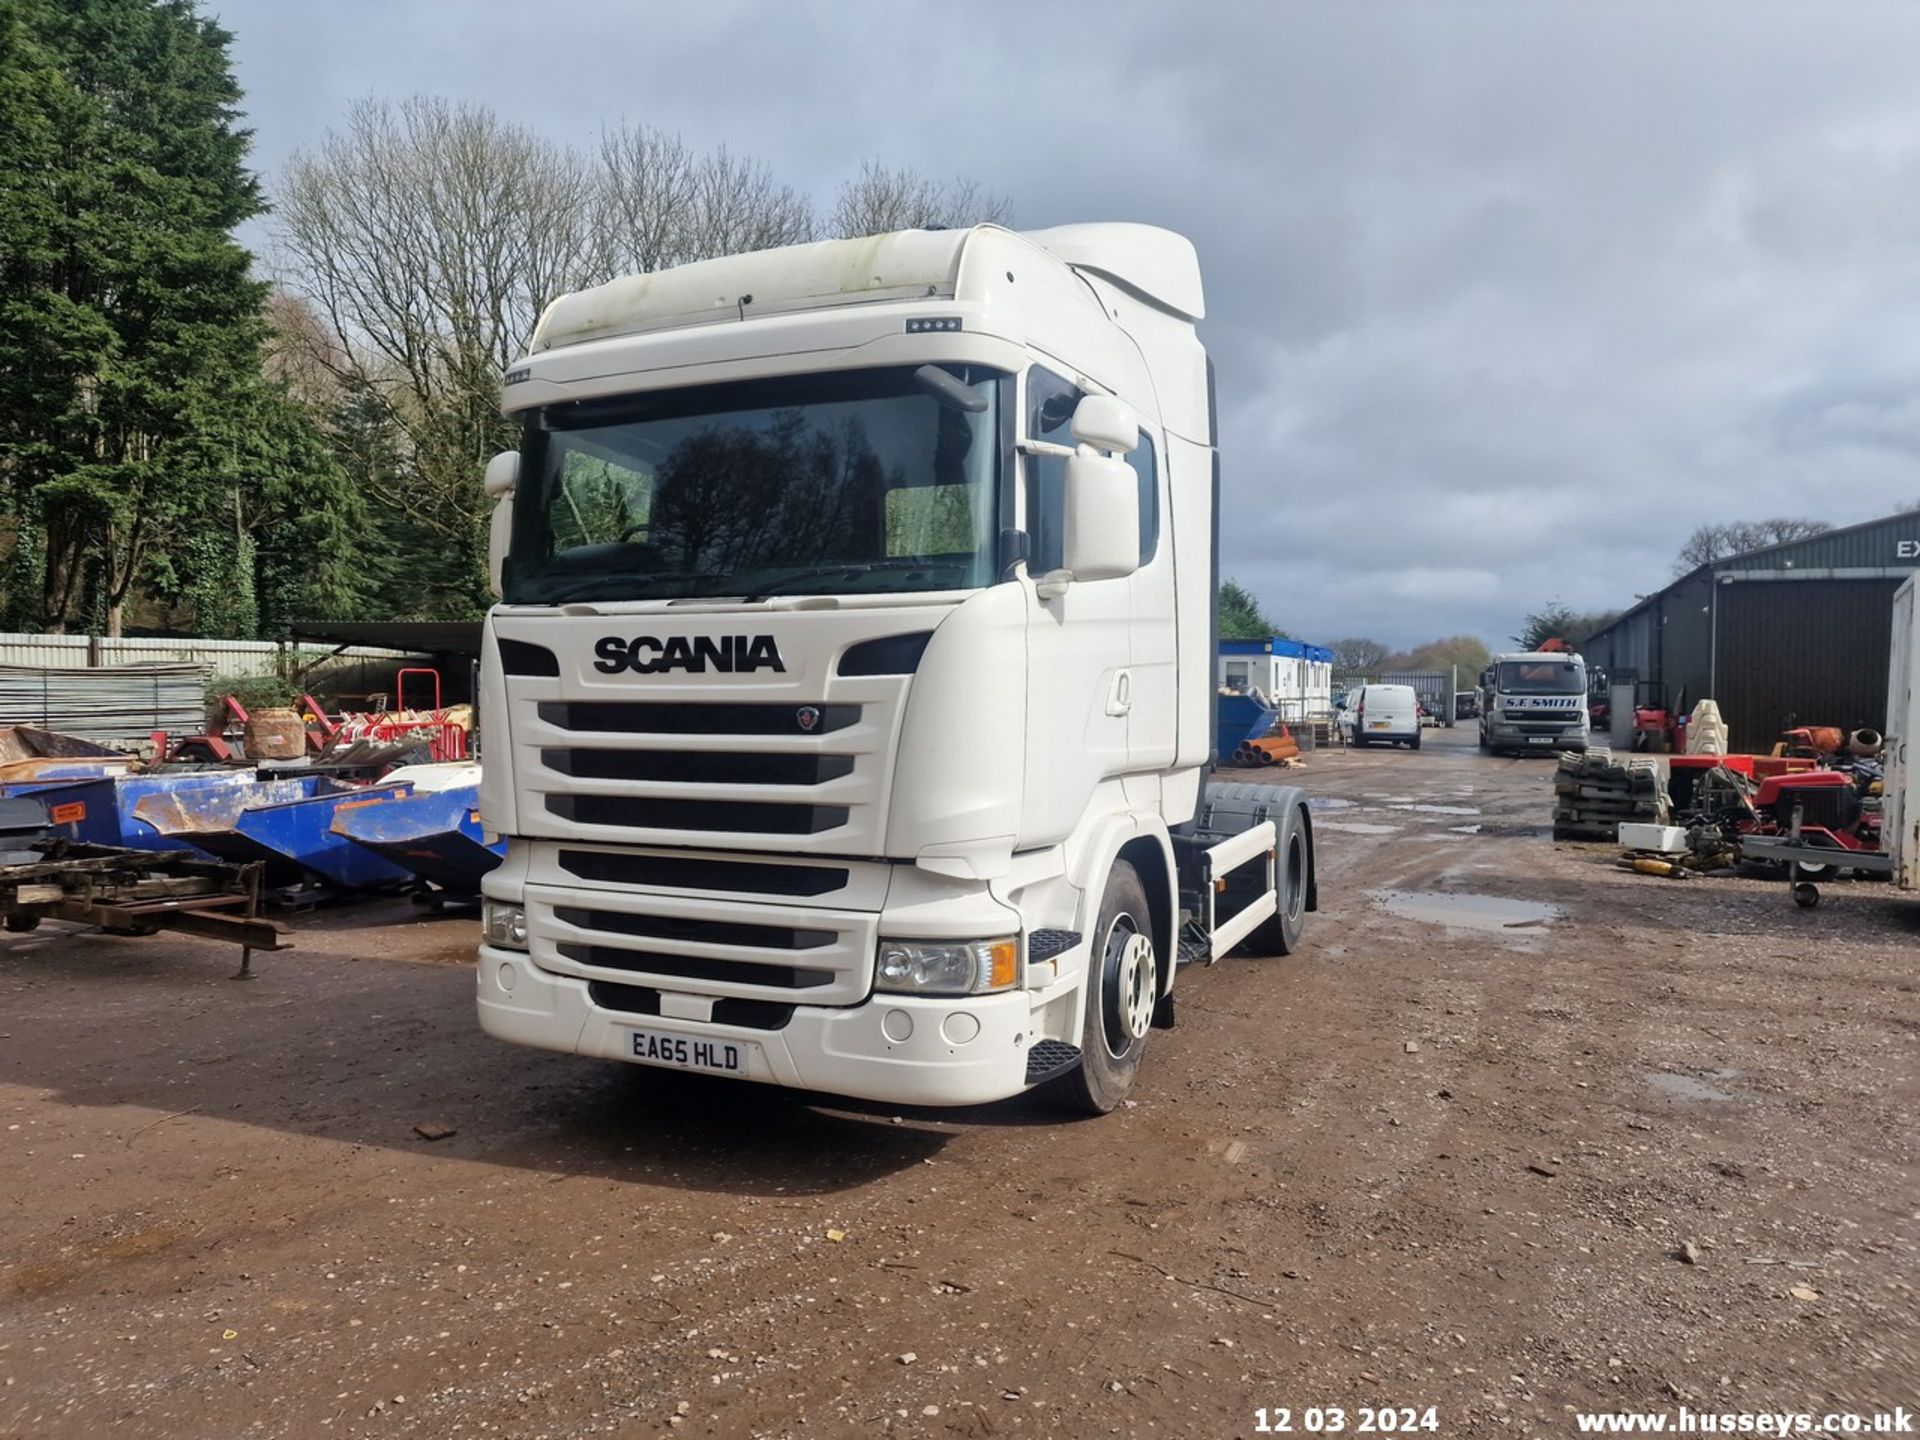 15/65 SCANIA R-SRS L-CLASS - 12740cc 2dr Tractor Unit (White) - Image 2 of 15